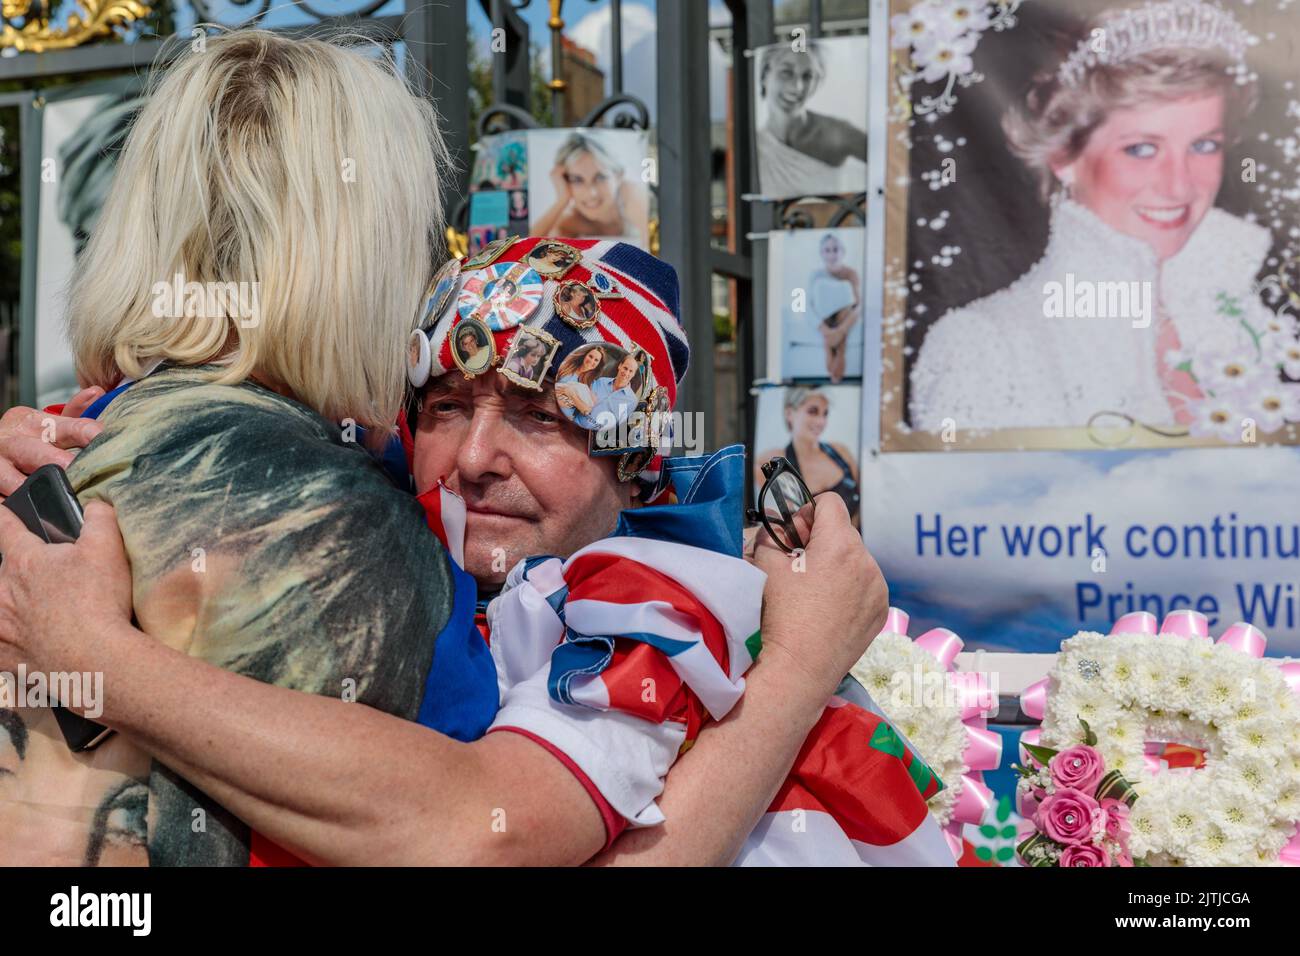 Kensington Palace, London, 31st August 2022.   Royal Fans Maria Scott and John Loughrey share a comforting hug at the Kensington Palace Gates on the 25th Anniversary of the death of Diana, Princess of Wales.  The Princess was killed in a car crash in Paris on this day in 1997.  Amanda Rose/Alamy Live News Stock Photo